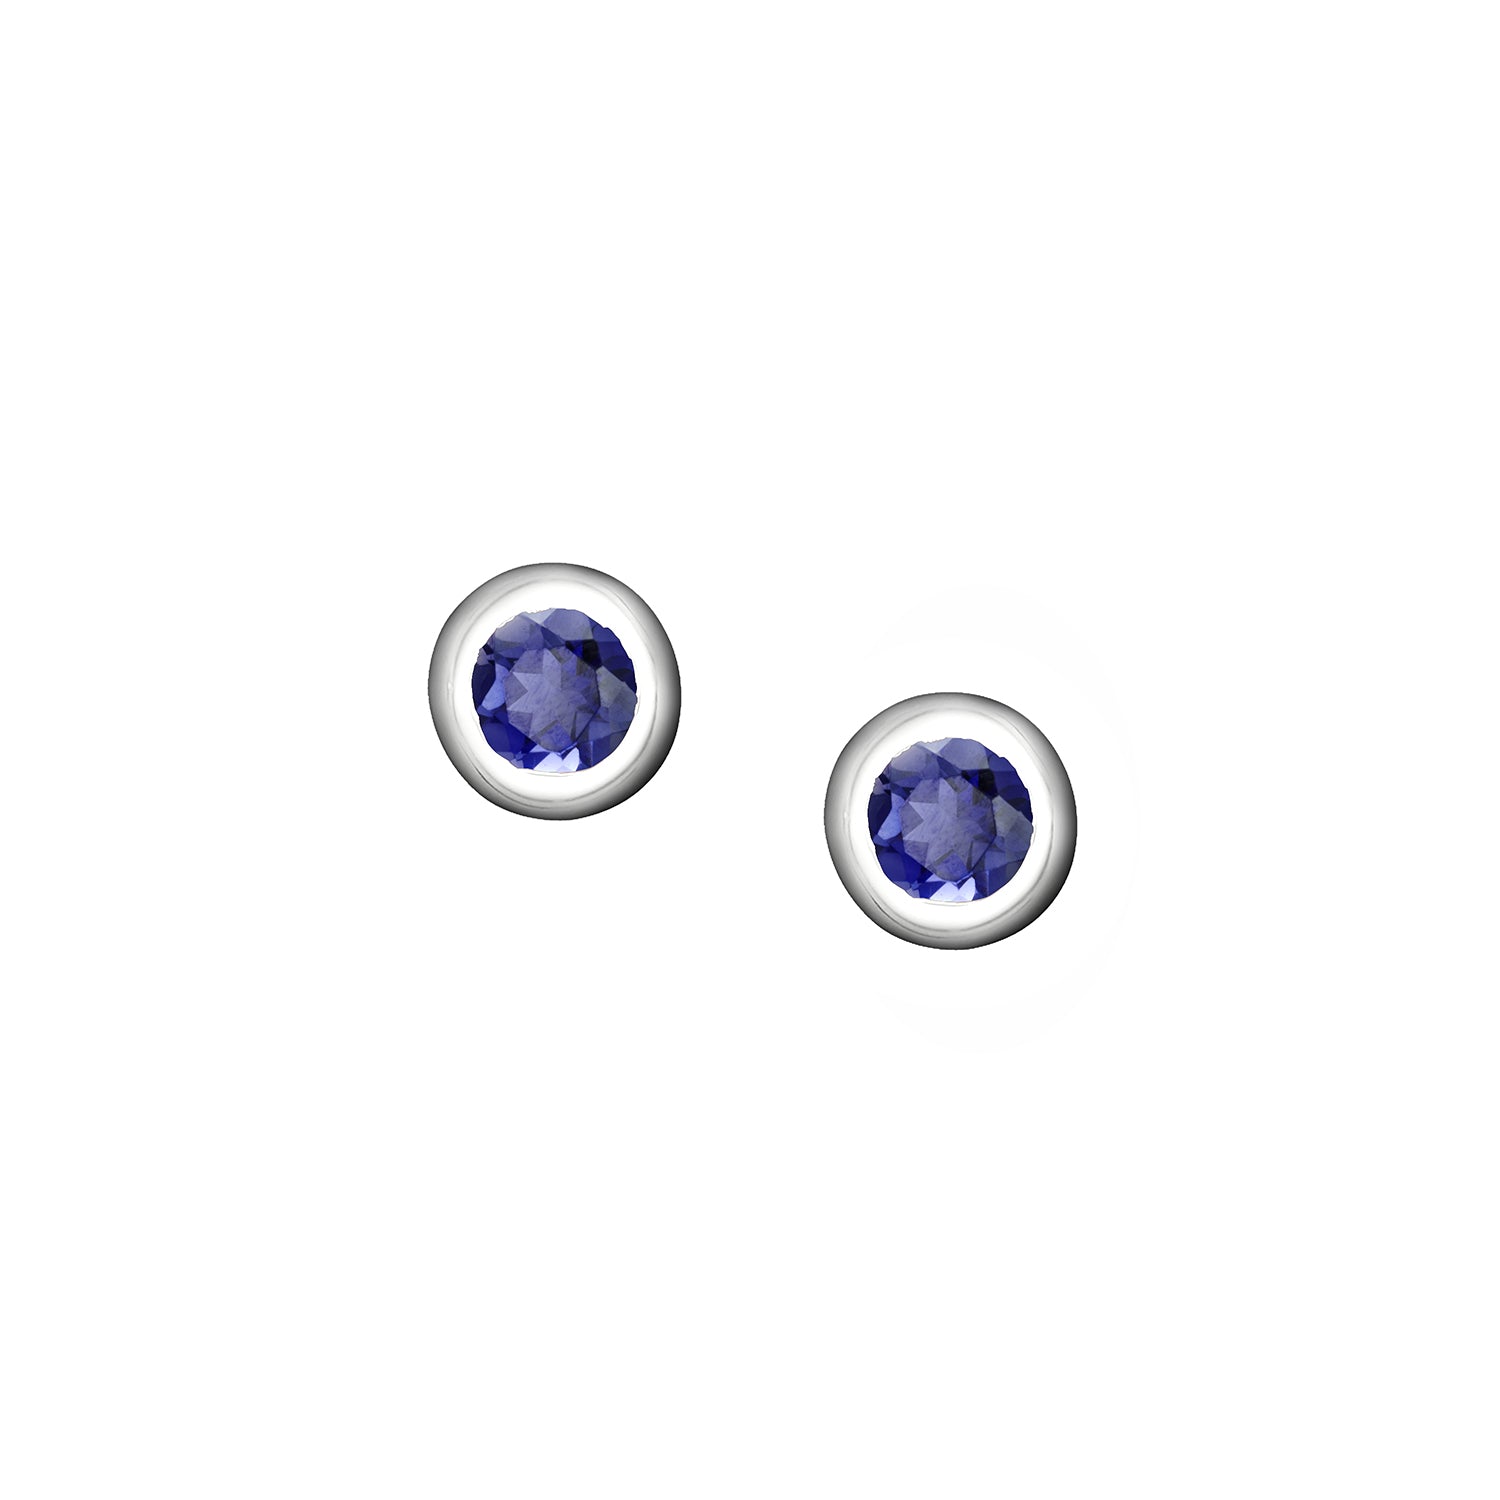 Polished Silver Crescent Moon Birthstone Earrings - September / Iolite